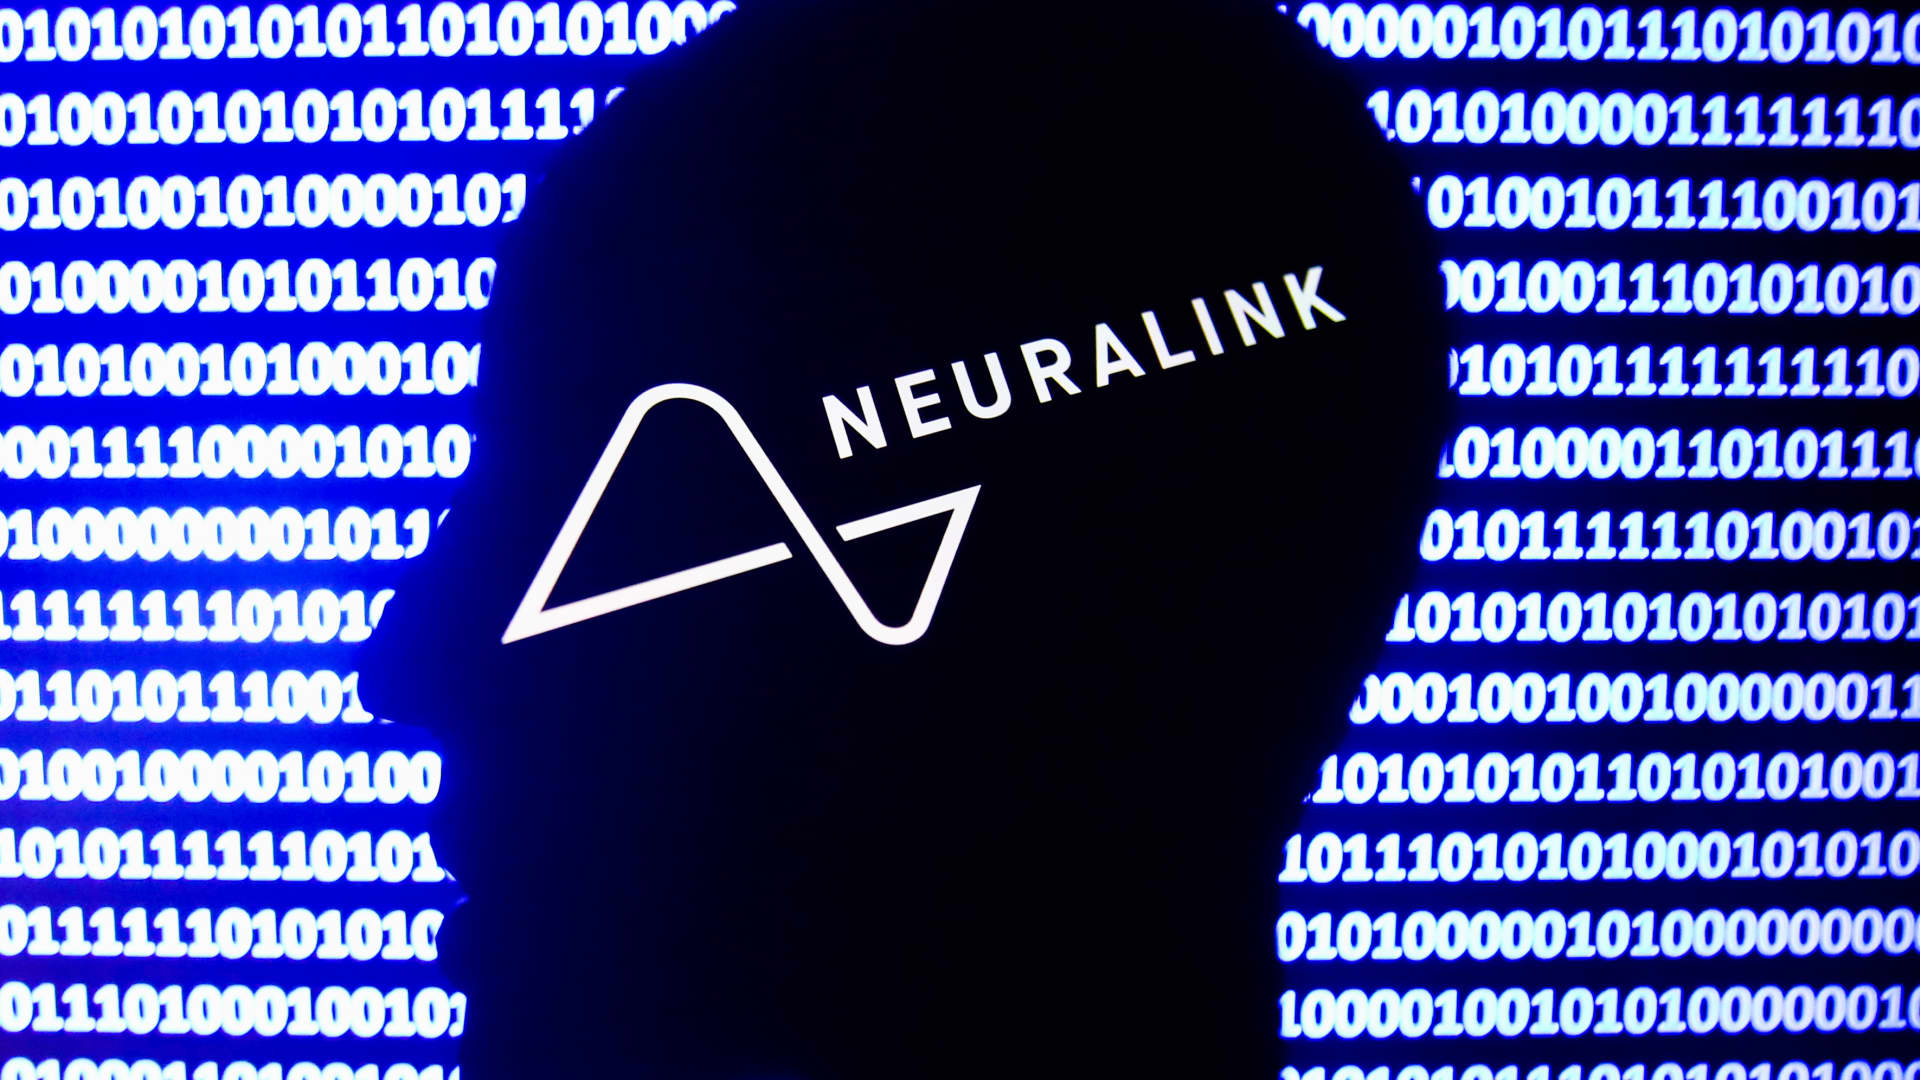 Musk says he’ll put a Neuralink chip in his brain when they are ready